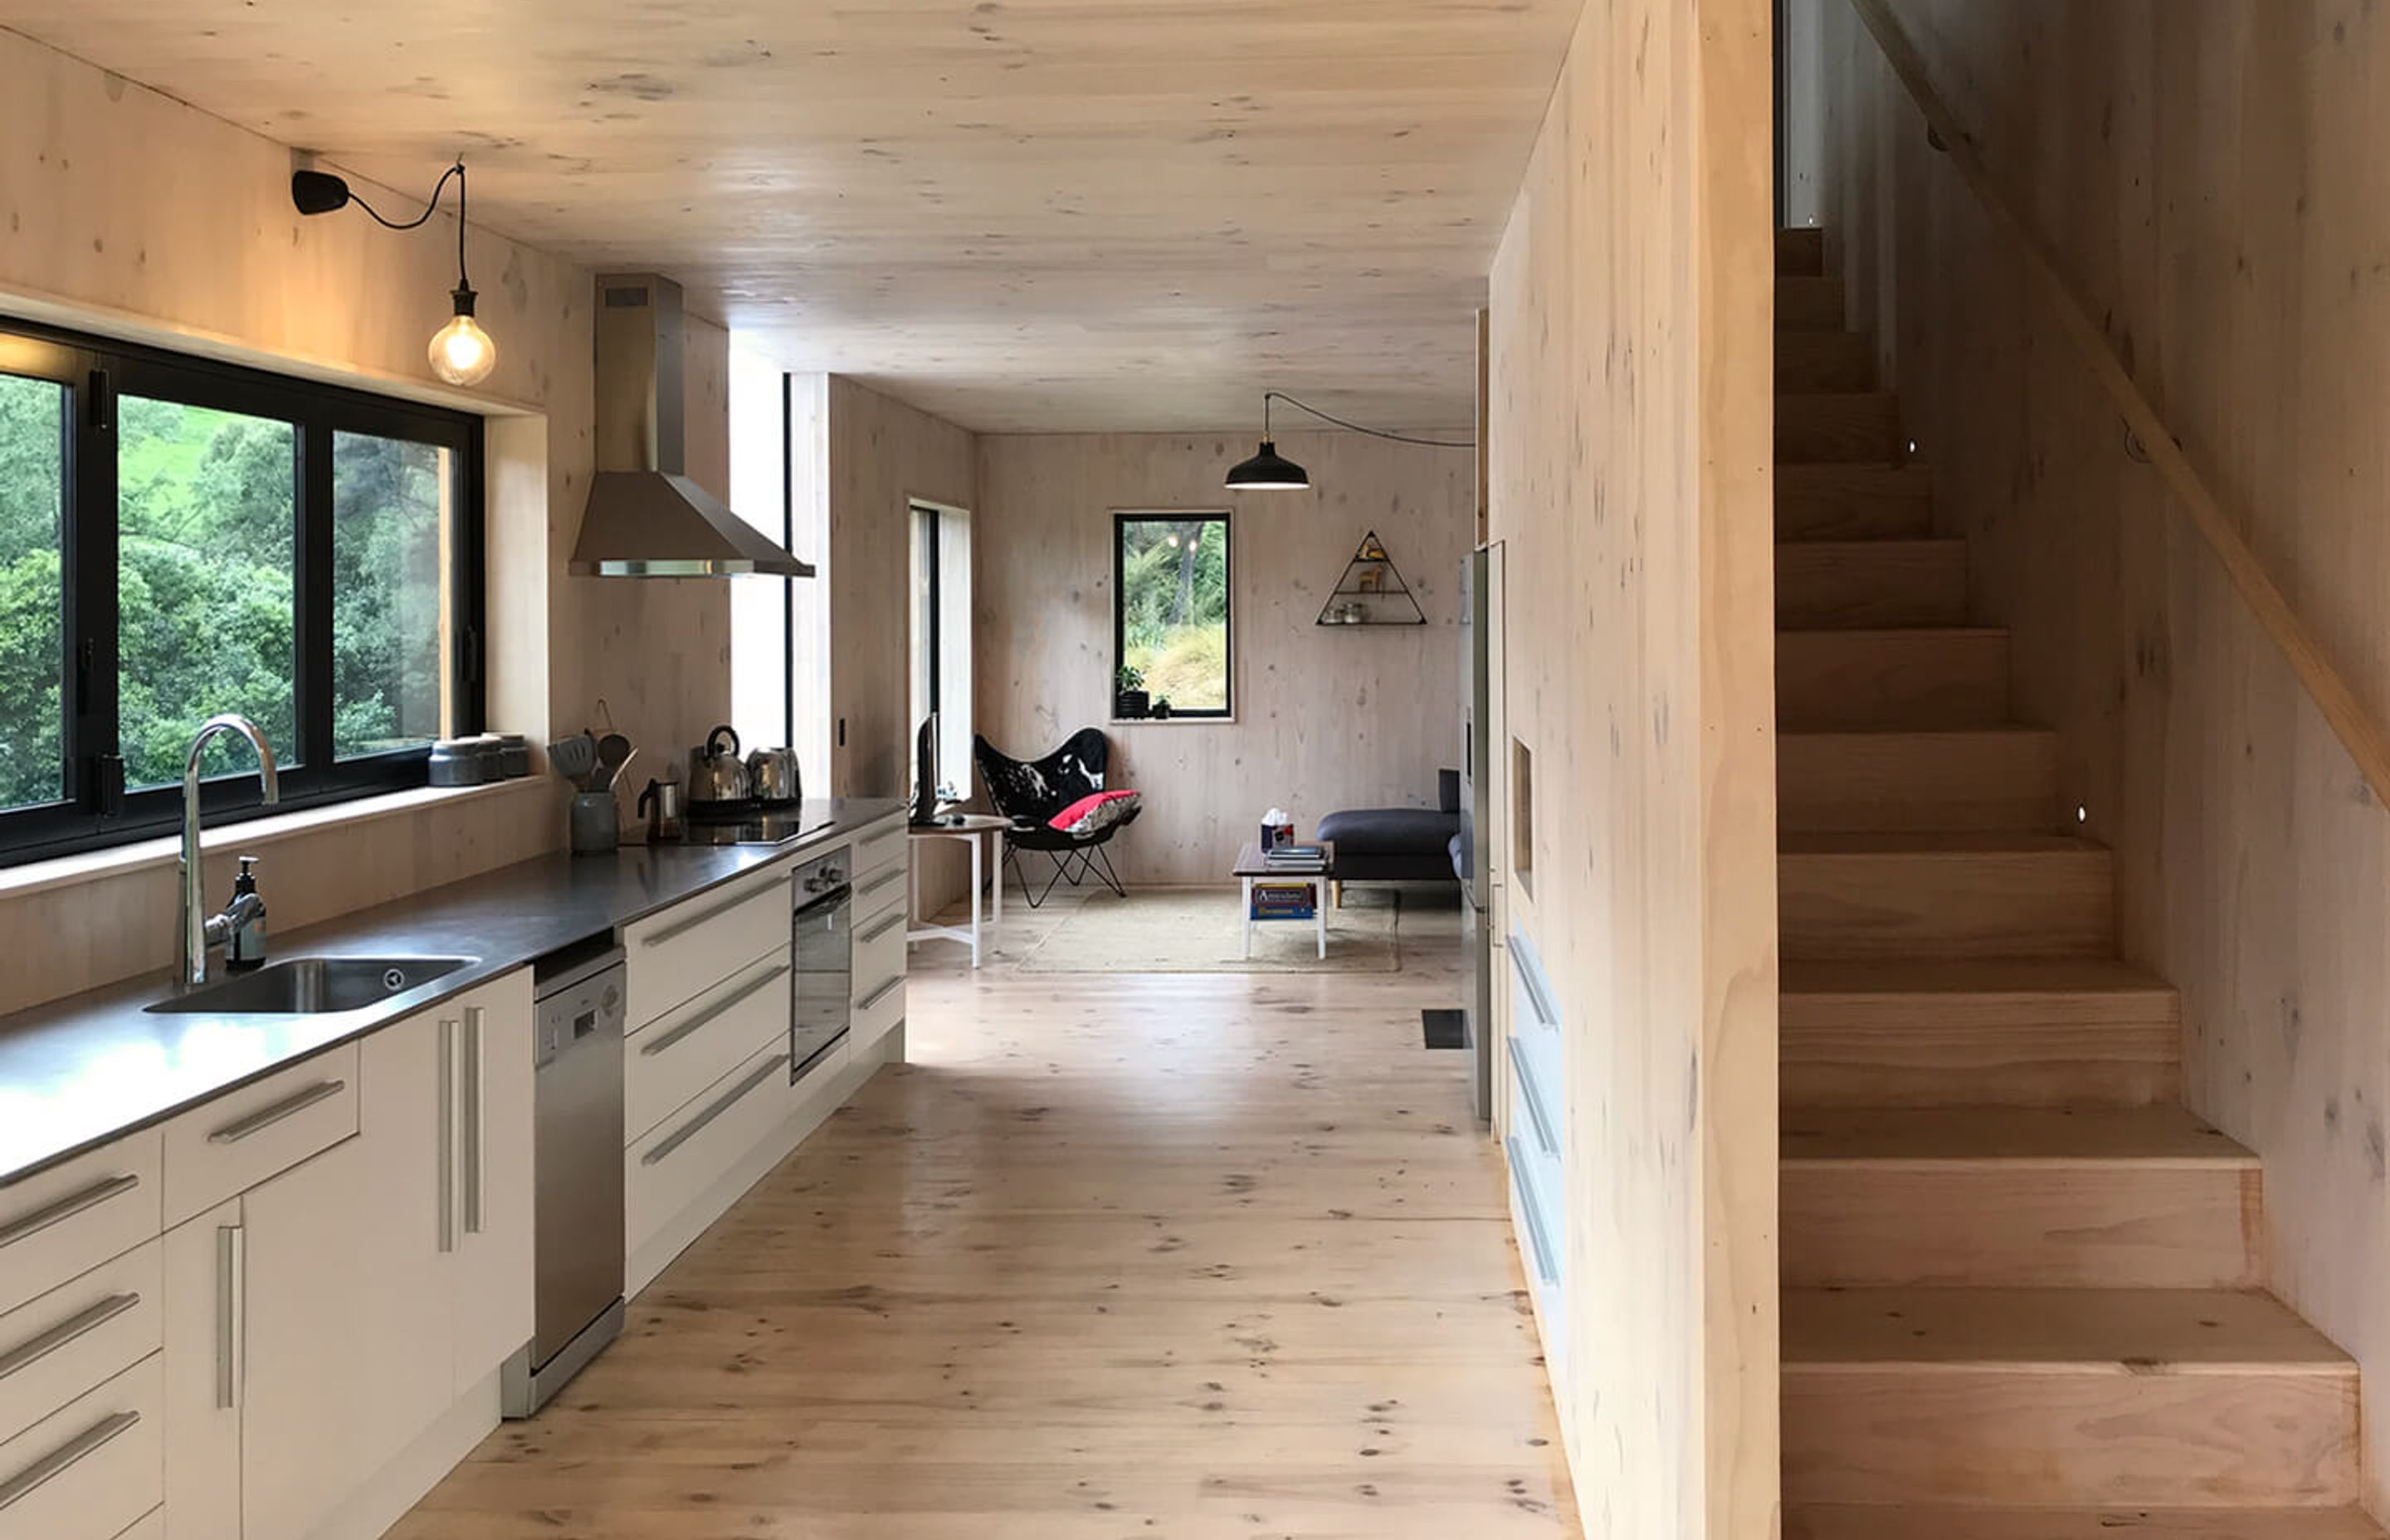 The living space at the far end leads tthrough to the repurposed kitchen with a stainless steel benchtop that matches the practical nature of the home. The timber  staircase has built-in storage.